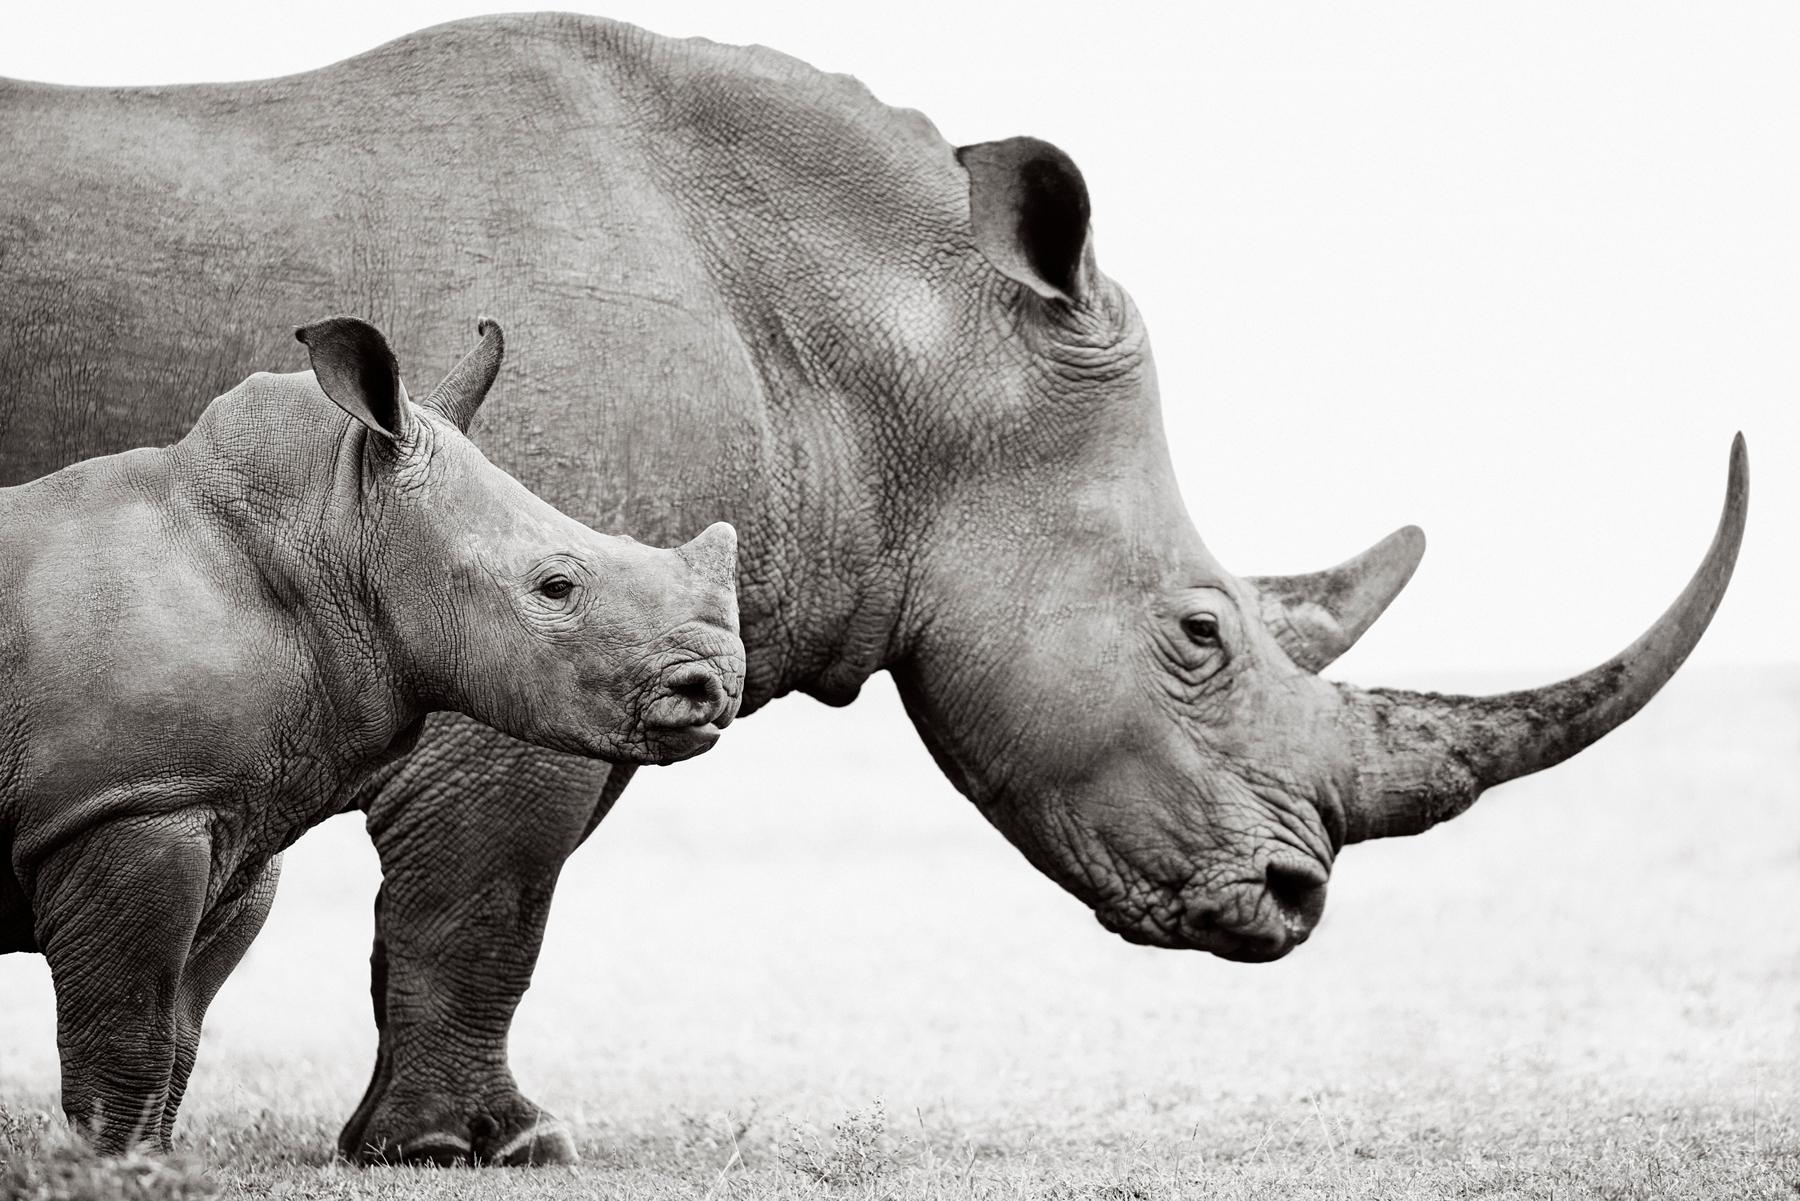 Drew Doggett Black and White Photograph - A young rhino stands next to their mother in this surreal and beautiful portrait